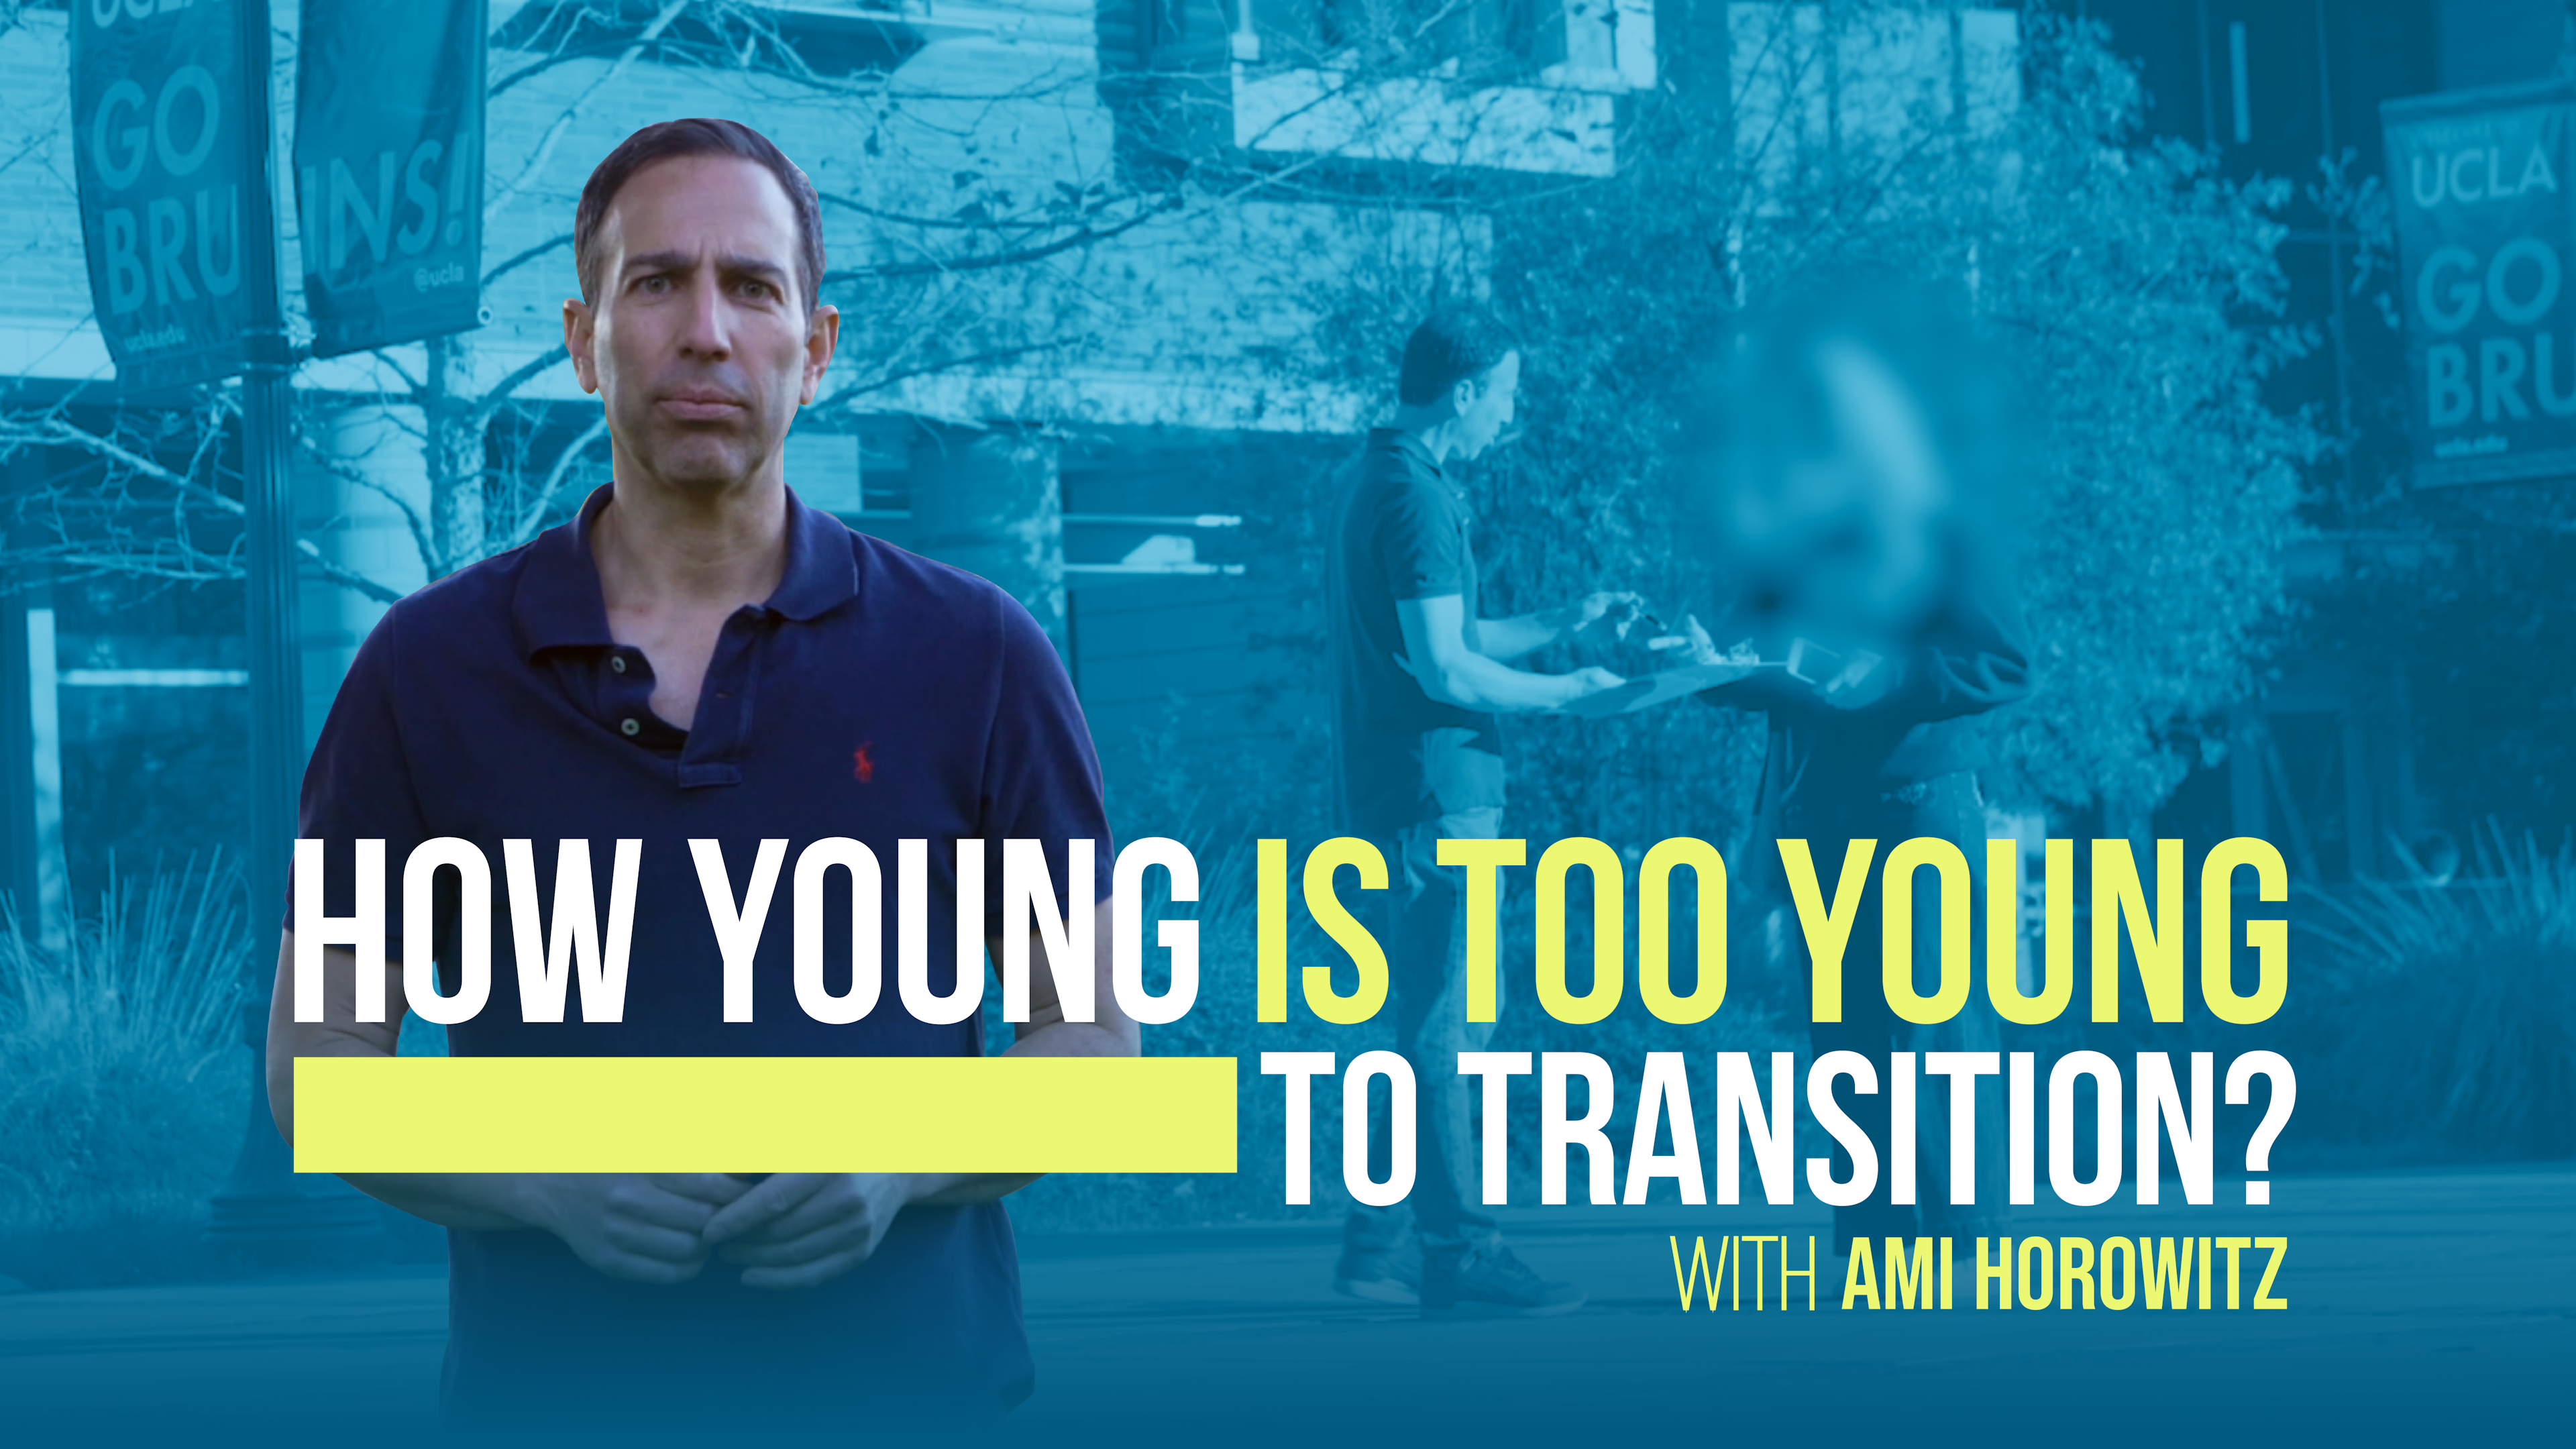 How Young Is Too Young to Transition?